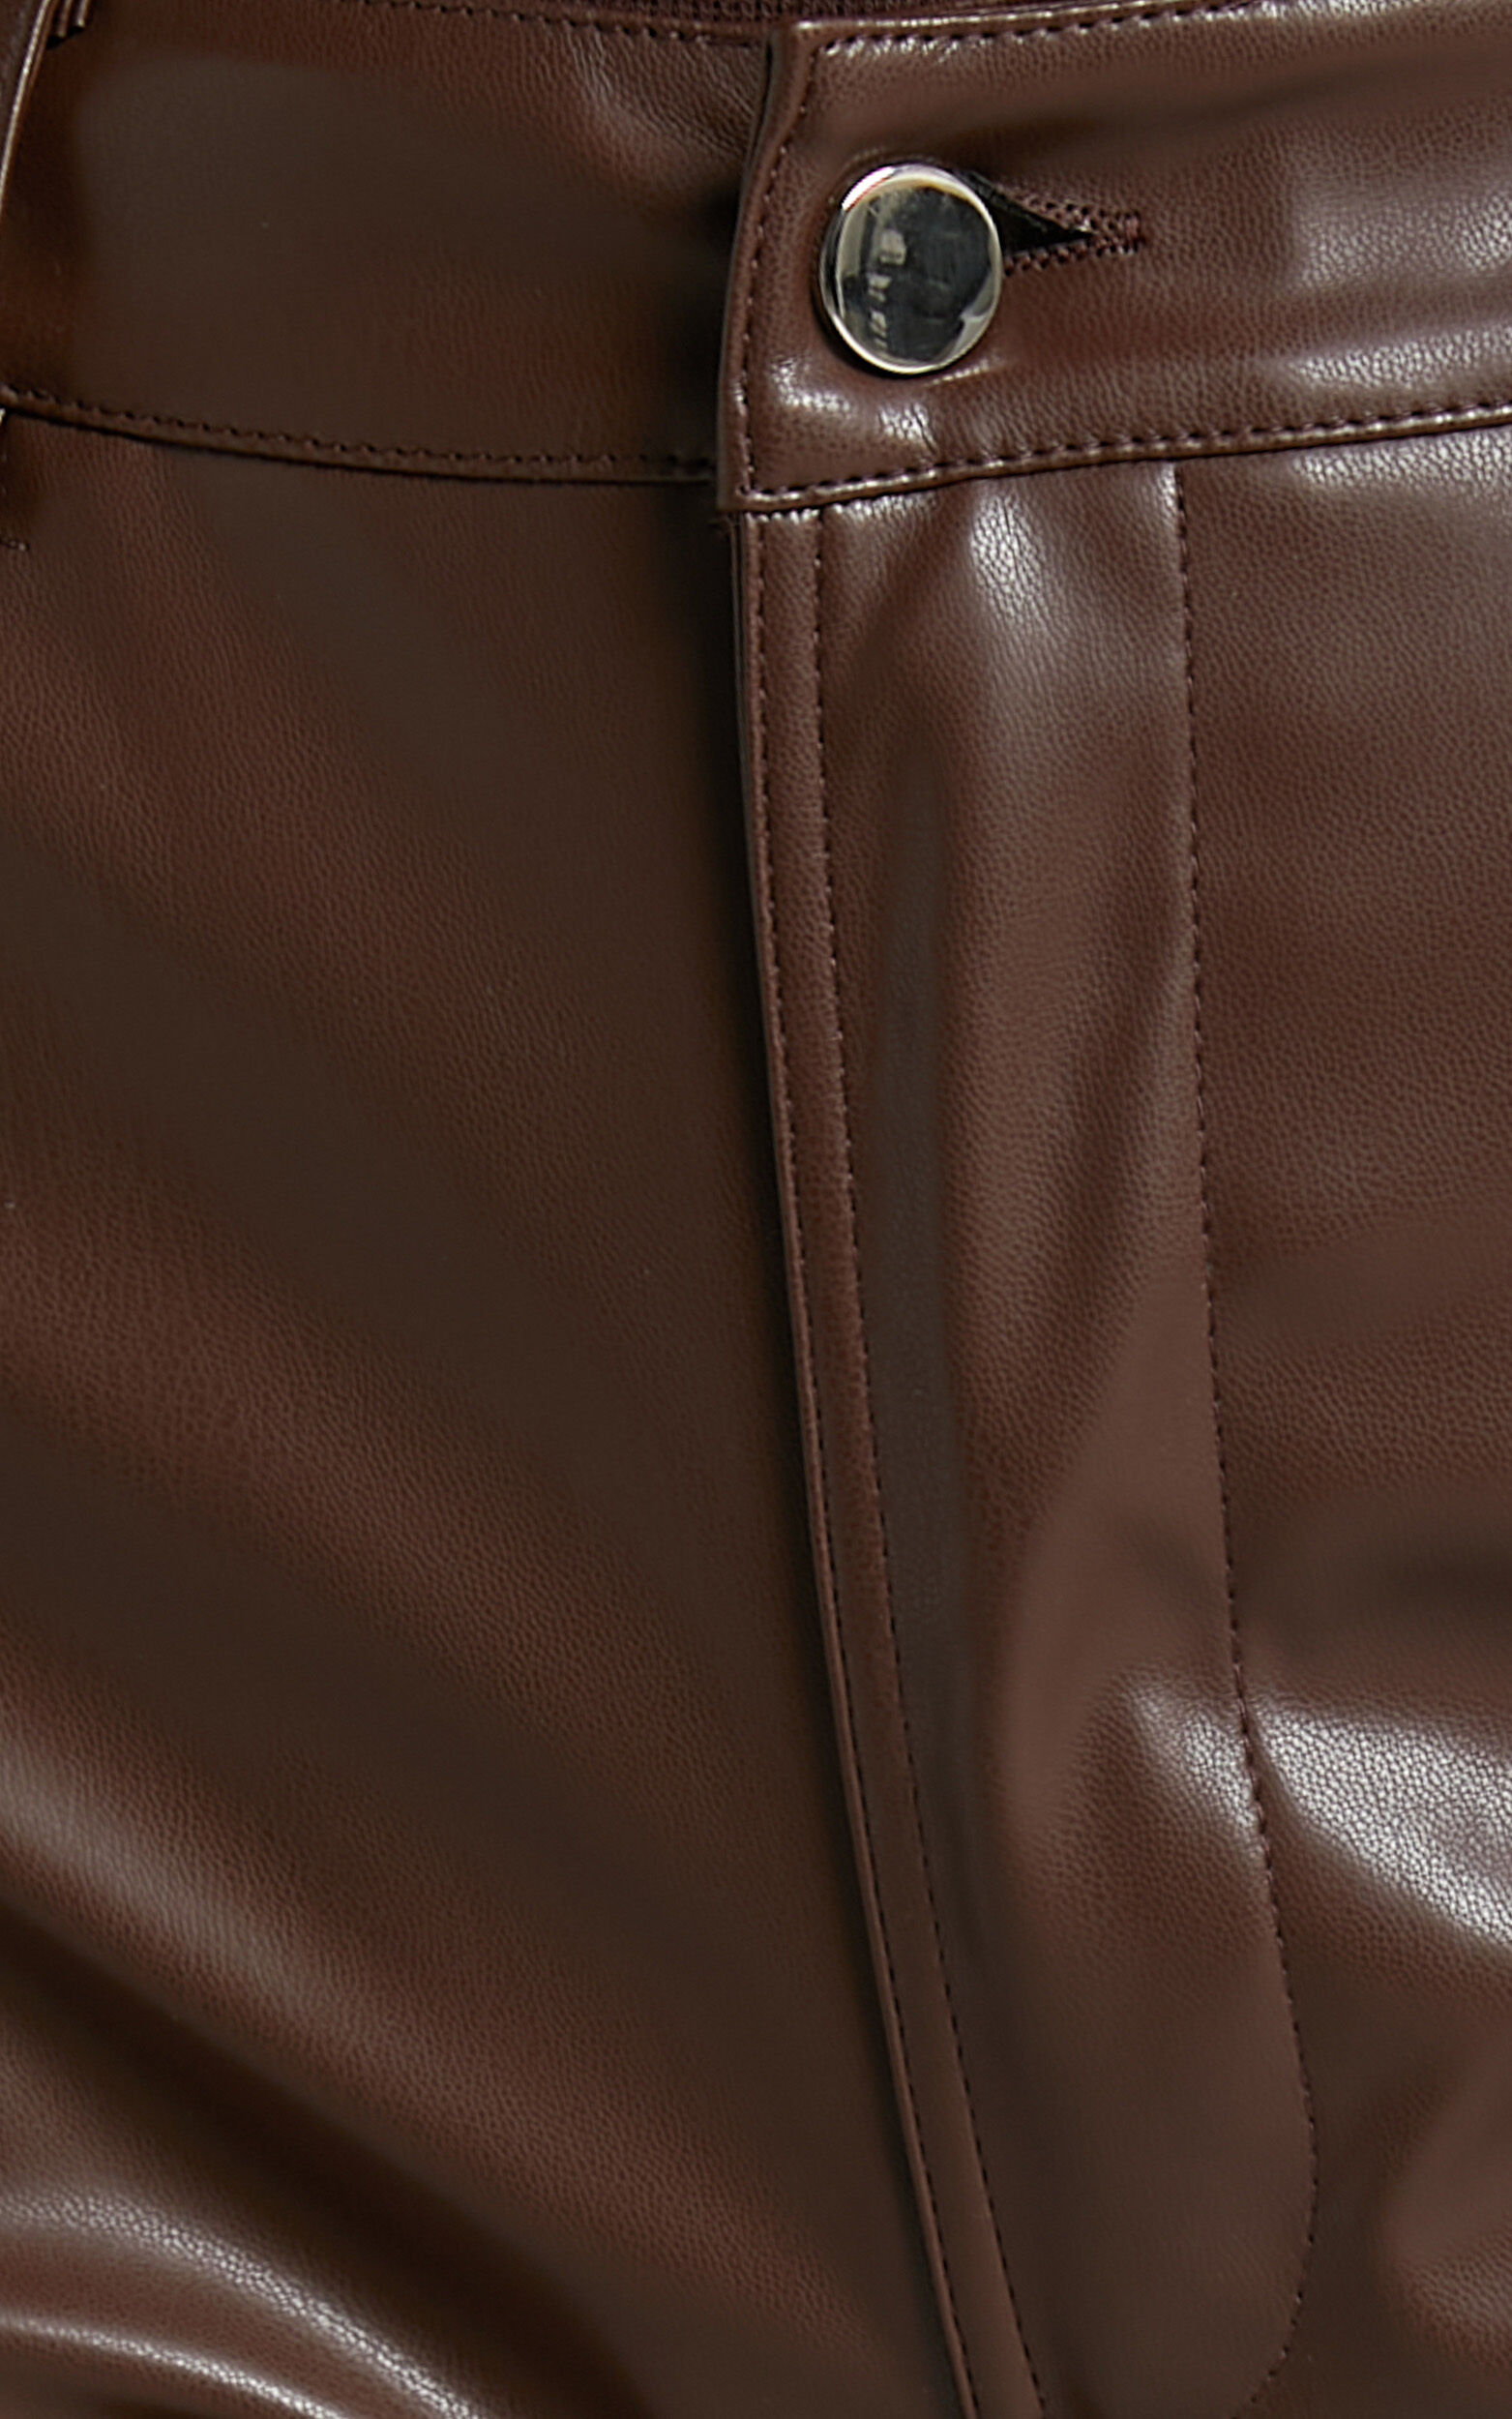 Dilyenne Pant - Mid Waist Straight Leg Faux Leather Pant in Chocolate